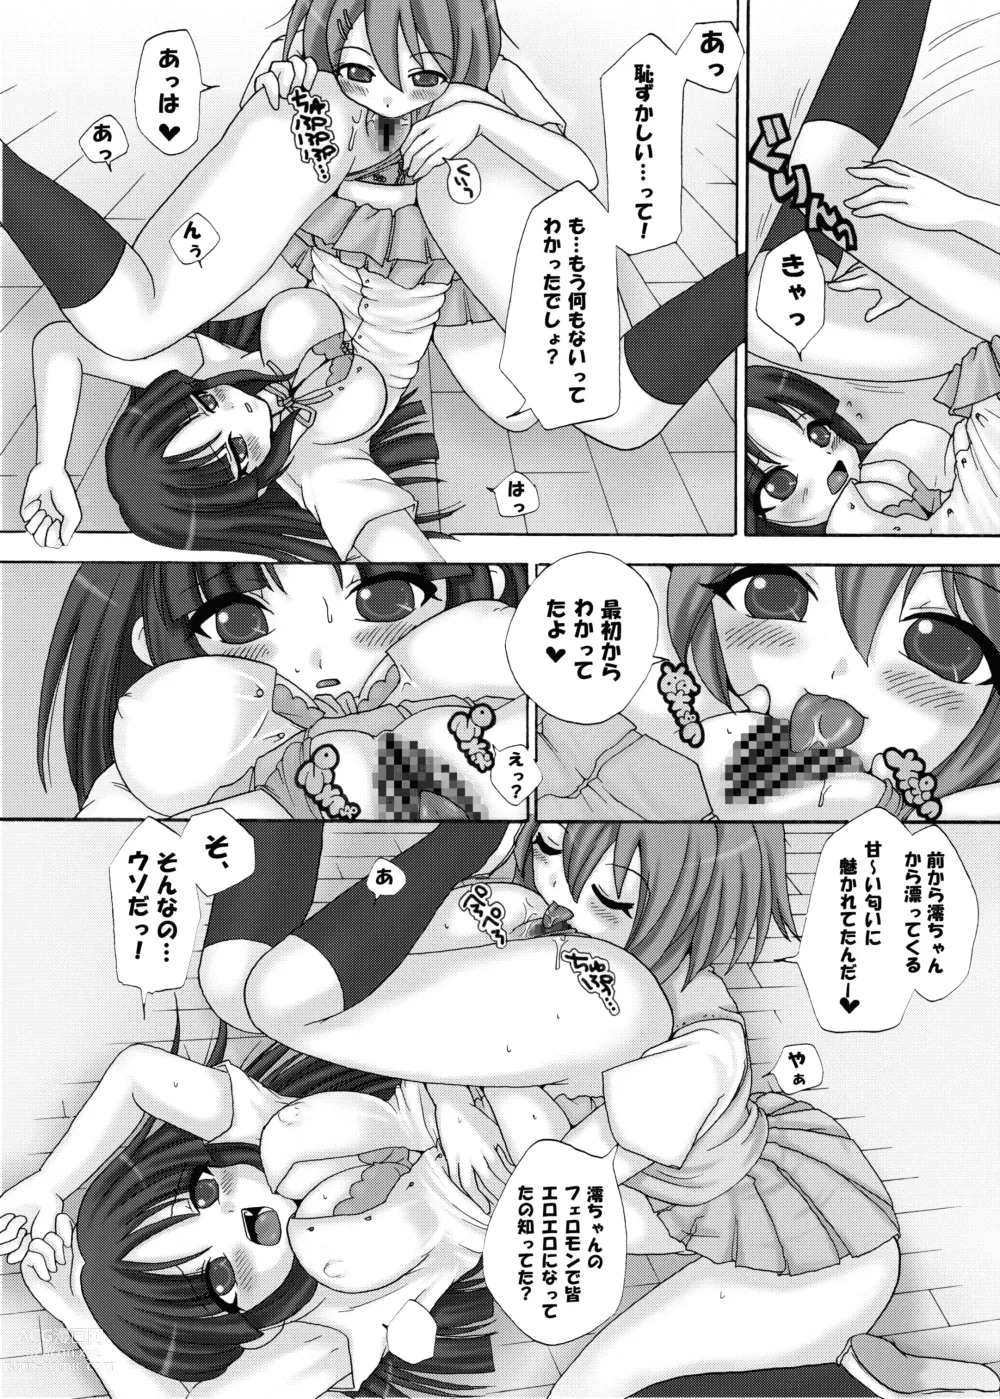 Page 16 of doujinshi Houkago Love Time